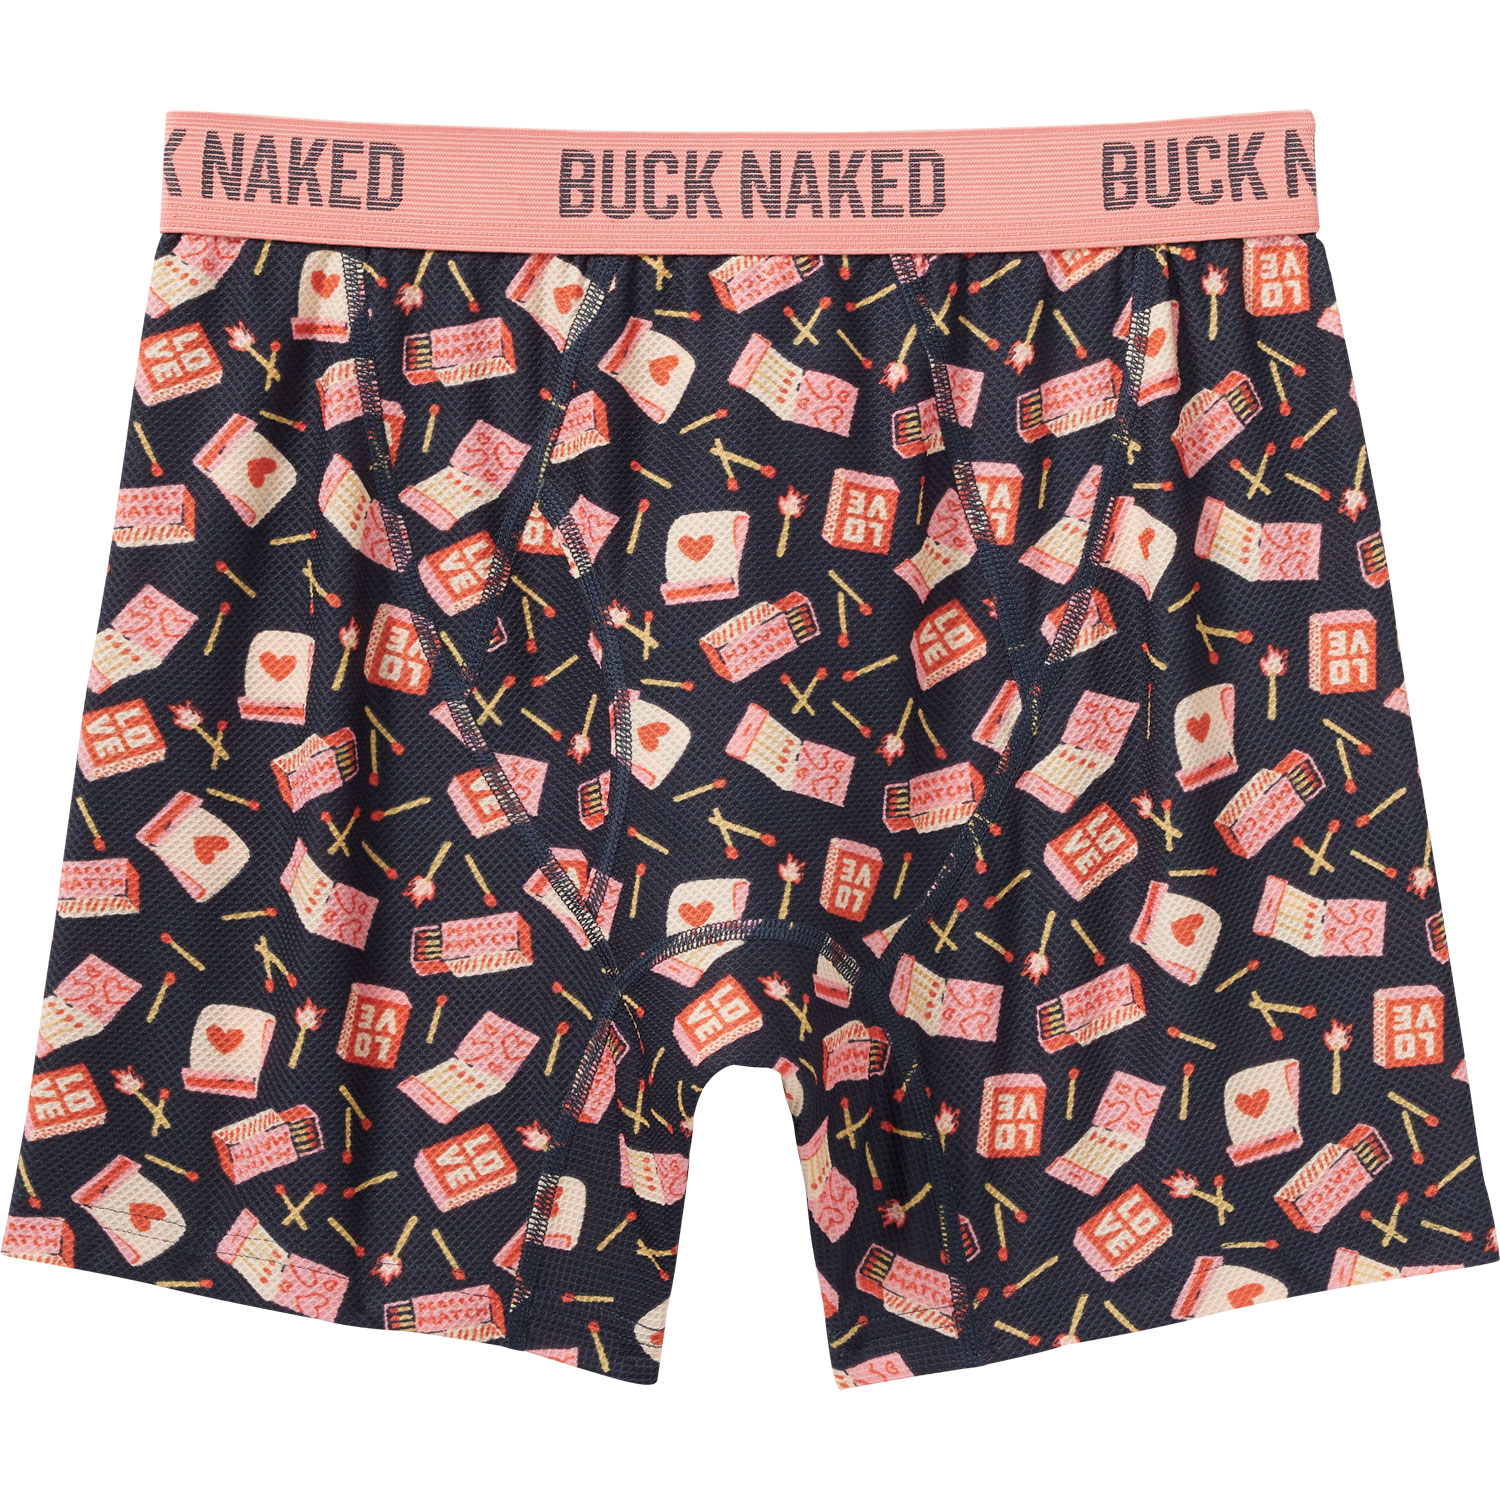 1 Pair Duluth Trading Buck Naked Boxer Brief in Sweet Treat 76715